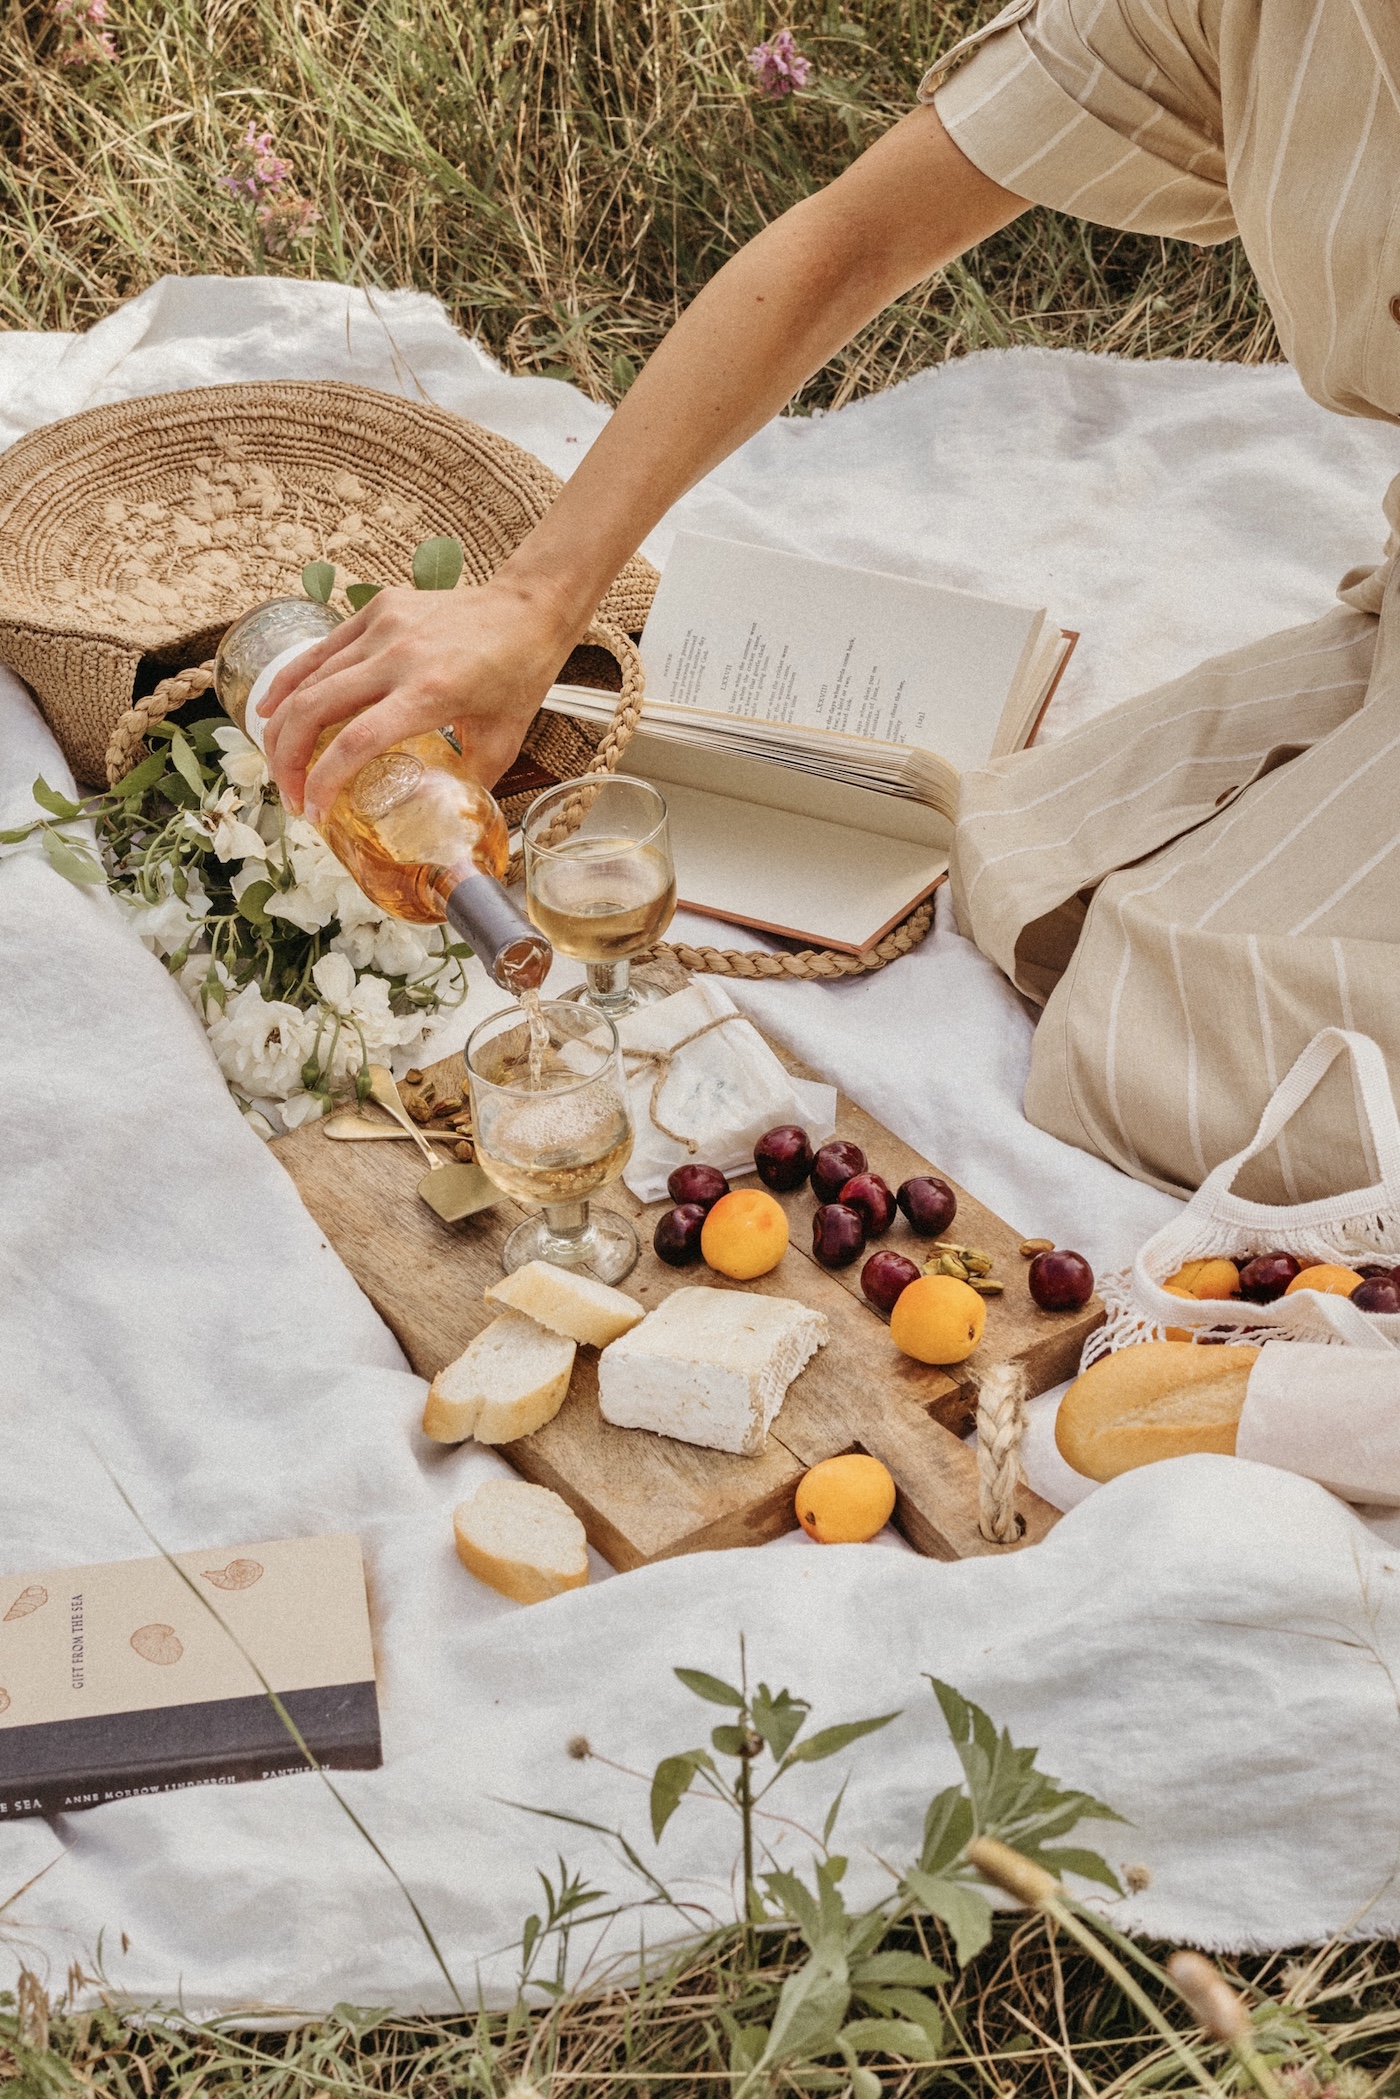 picnic aesthetic spread out on white linen